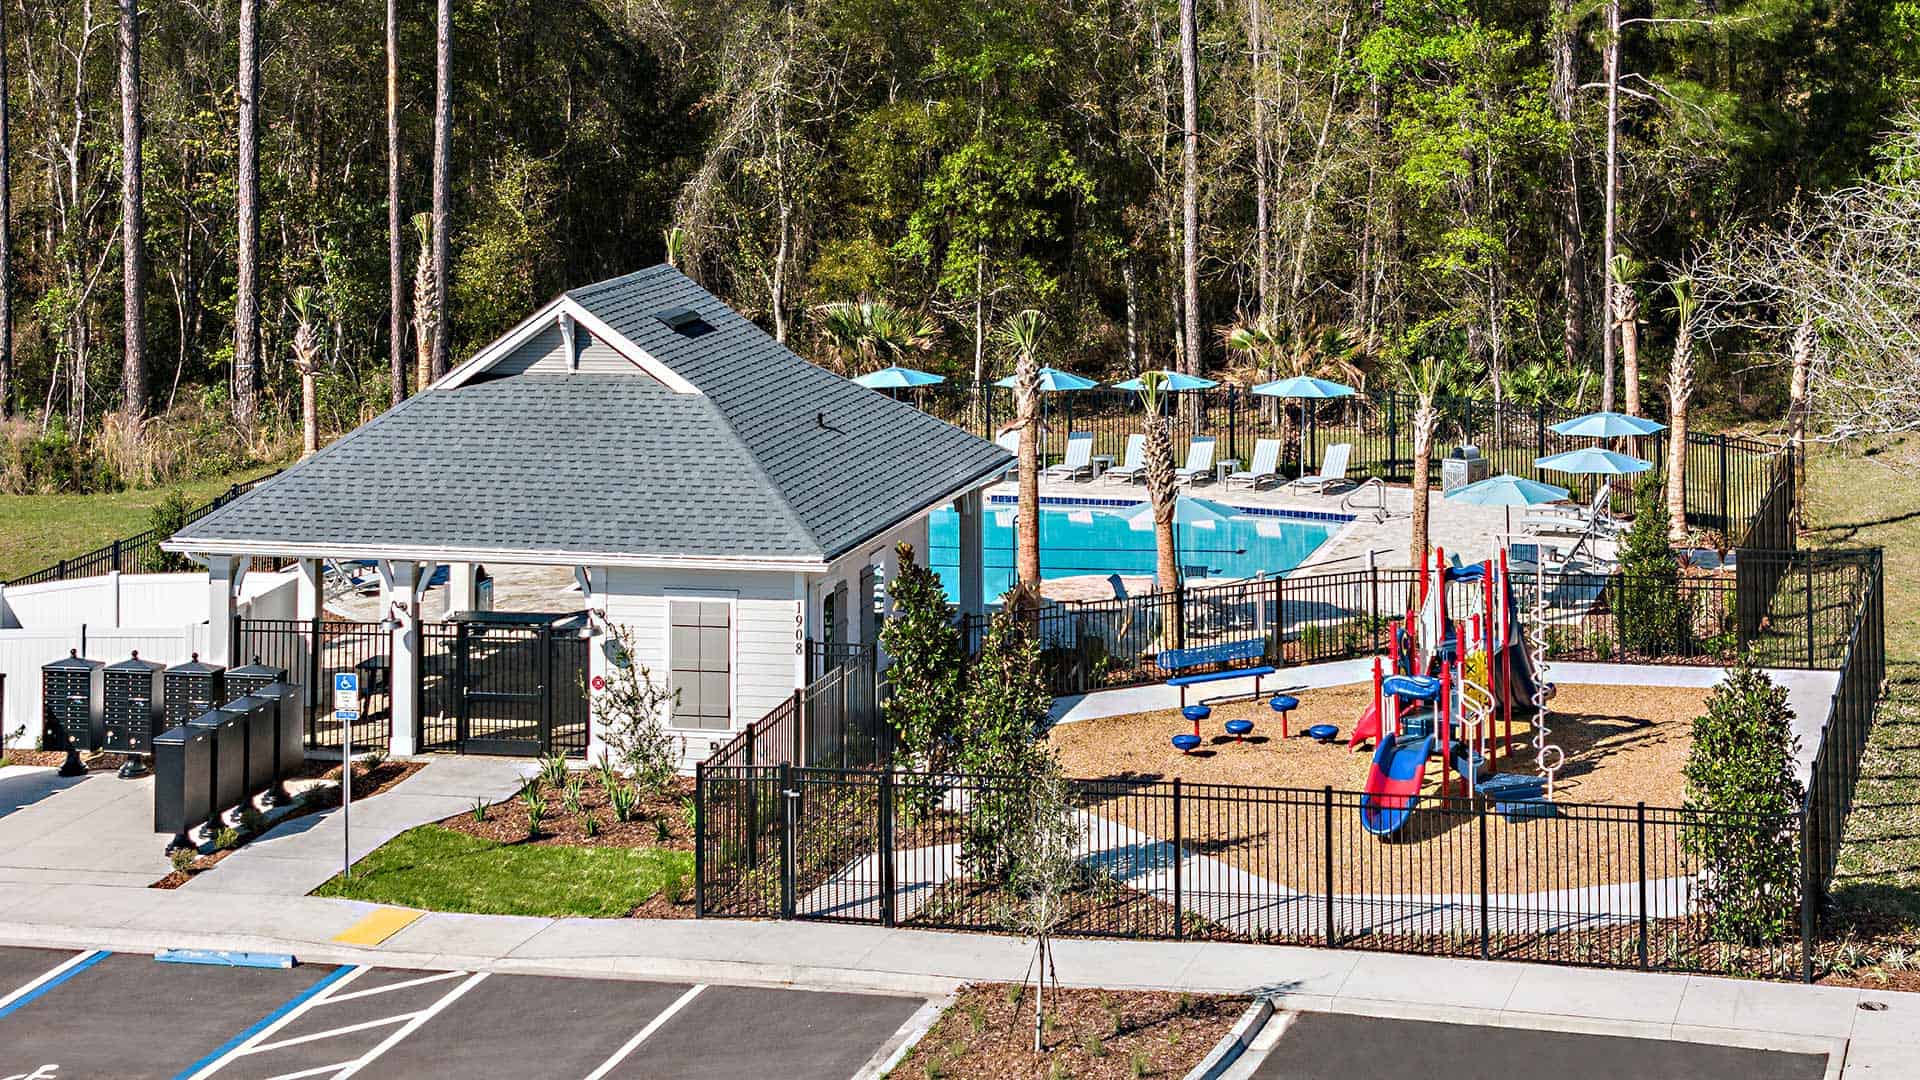 Liberty Square Amenity Center pavilion playground and pool